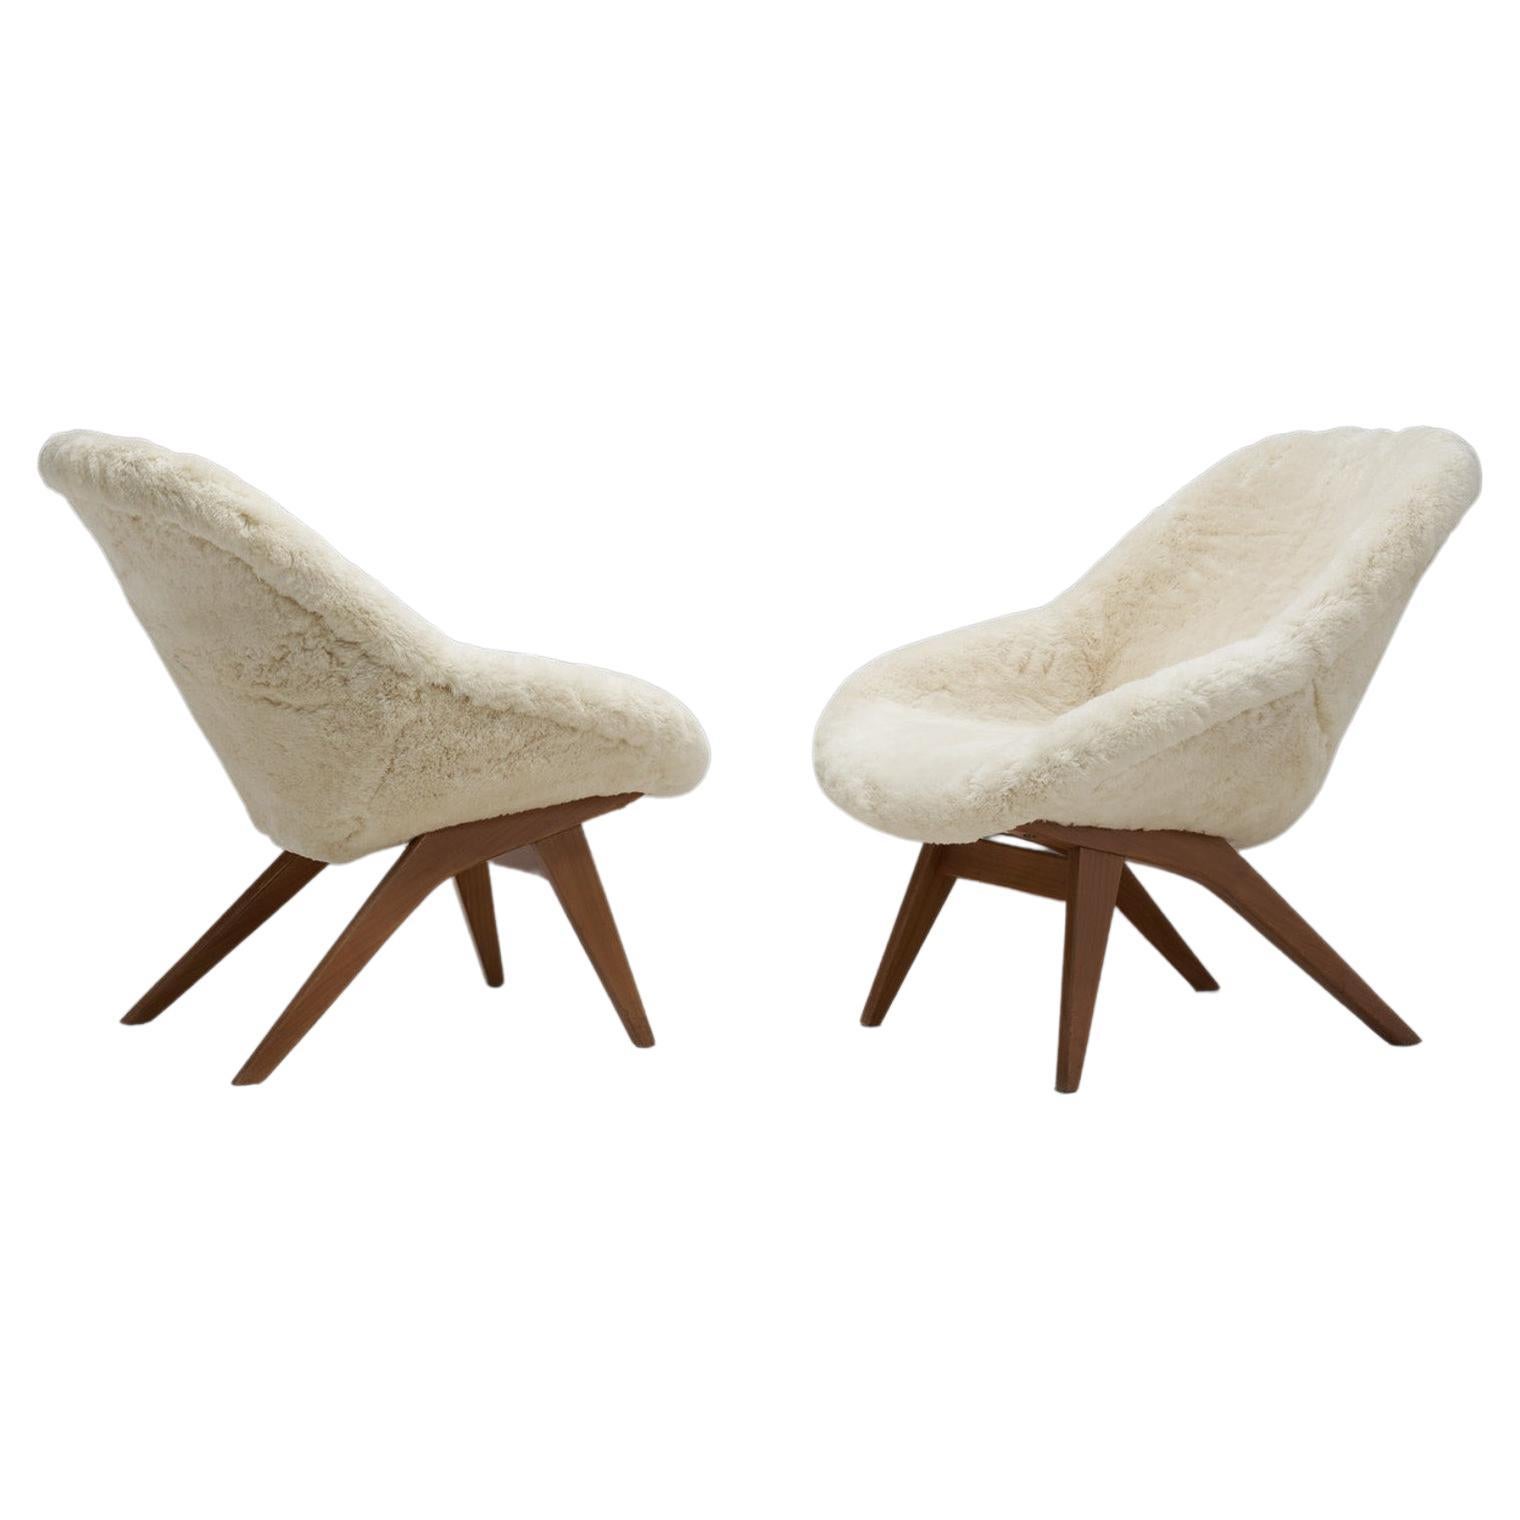 European Mid-Century Modern Lounge Chairs with Tapered Legs, Europe circa 1950